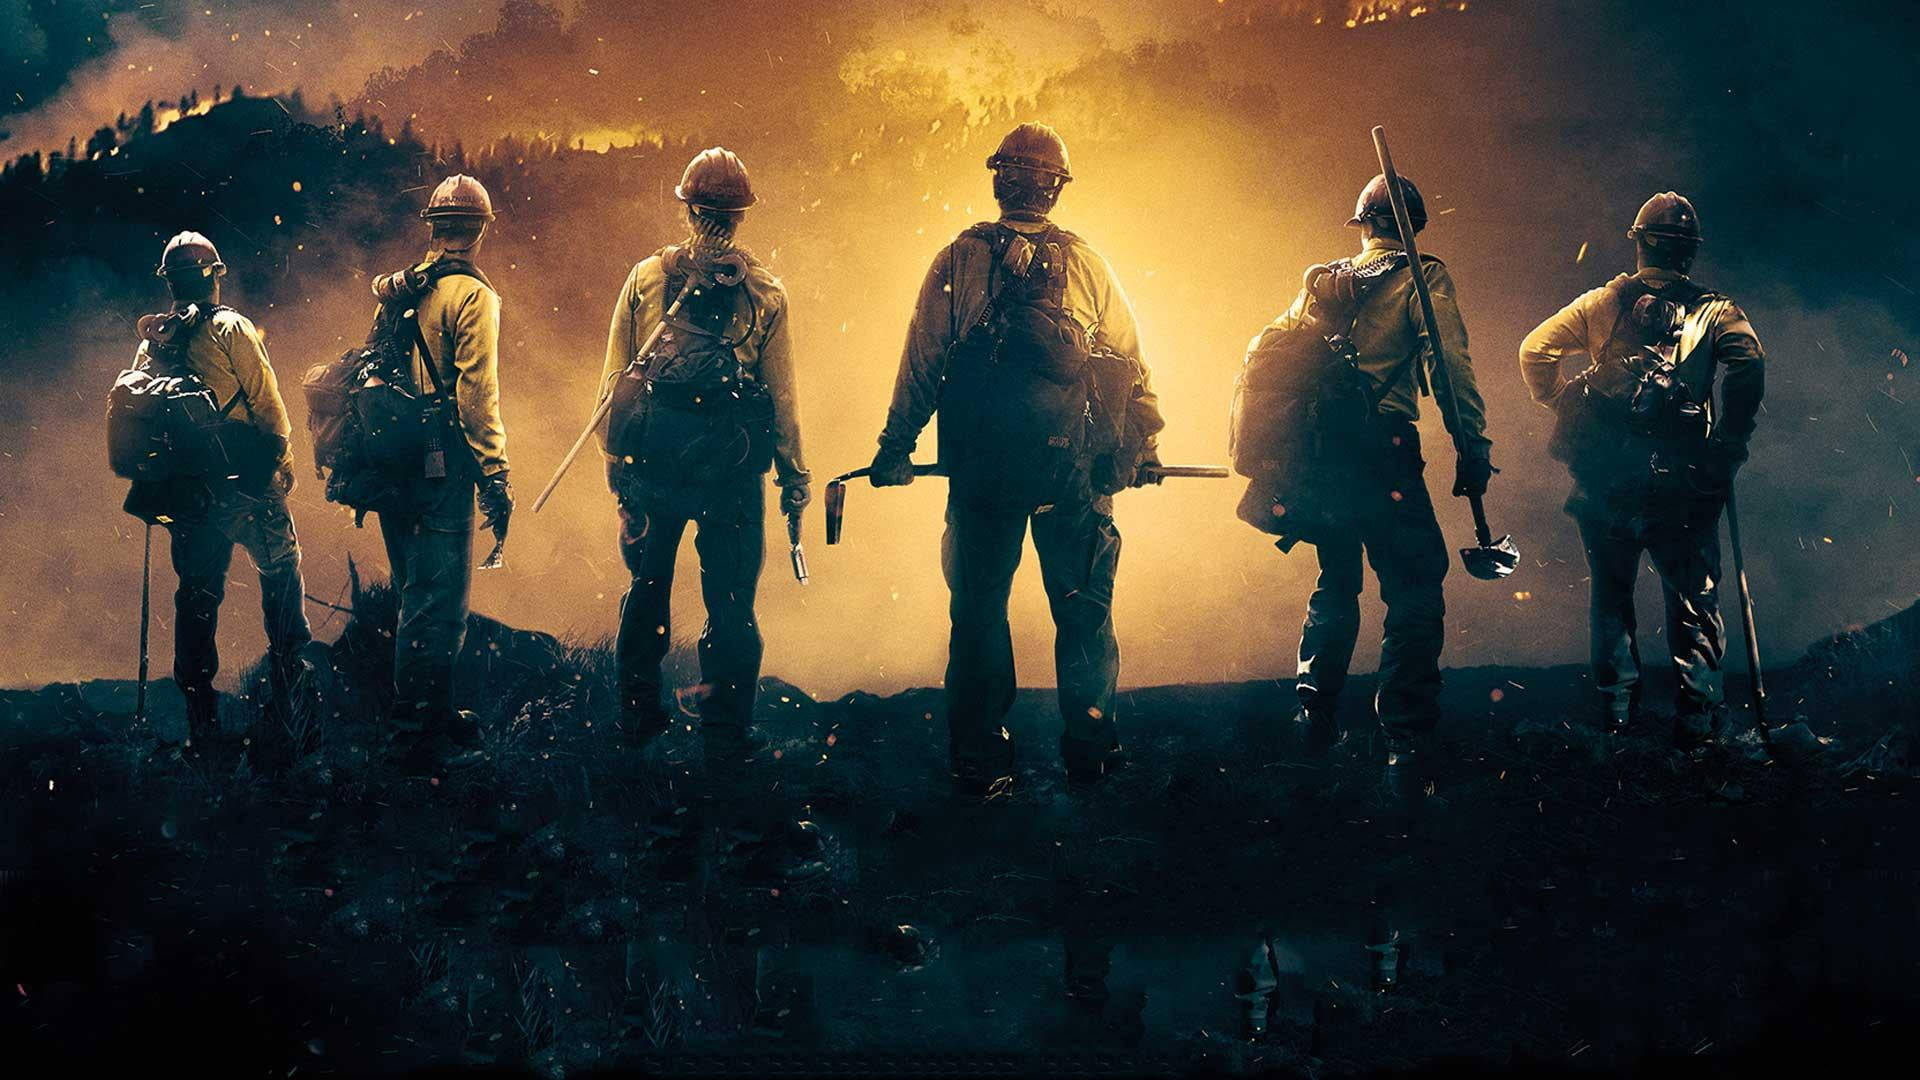 Six Firefighters Responding To Wildfire Wallpaper